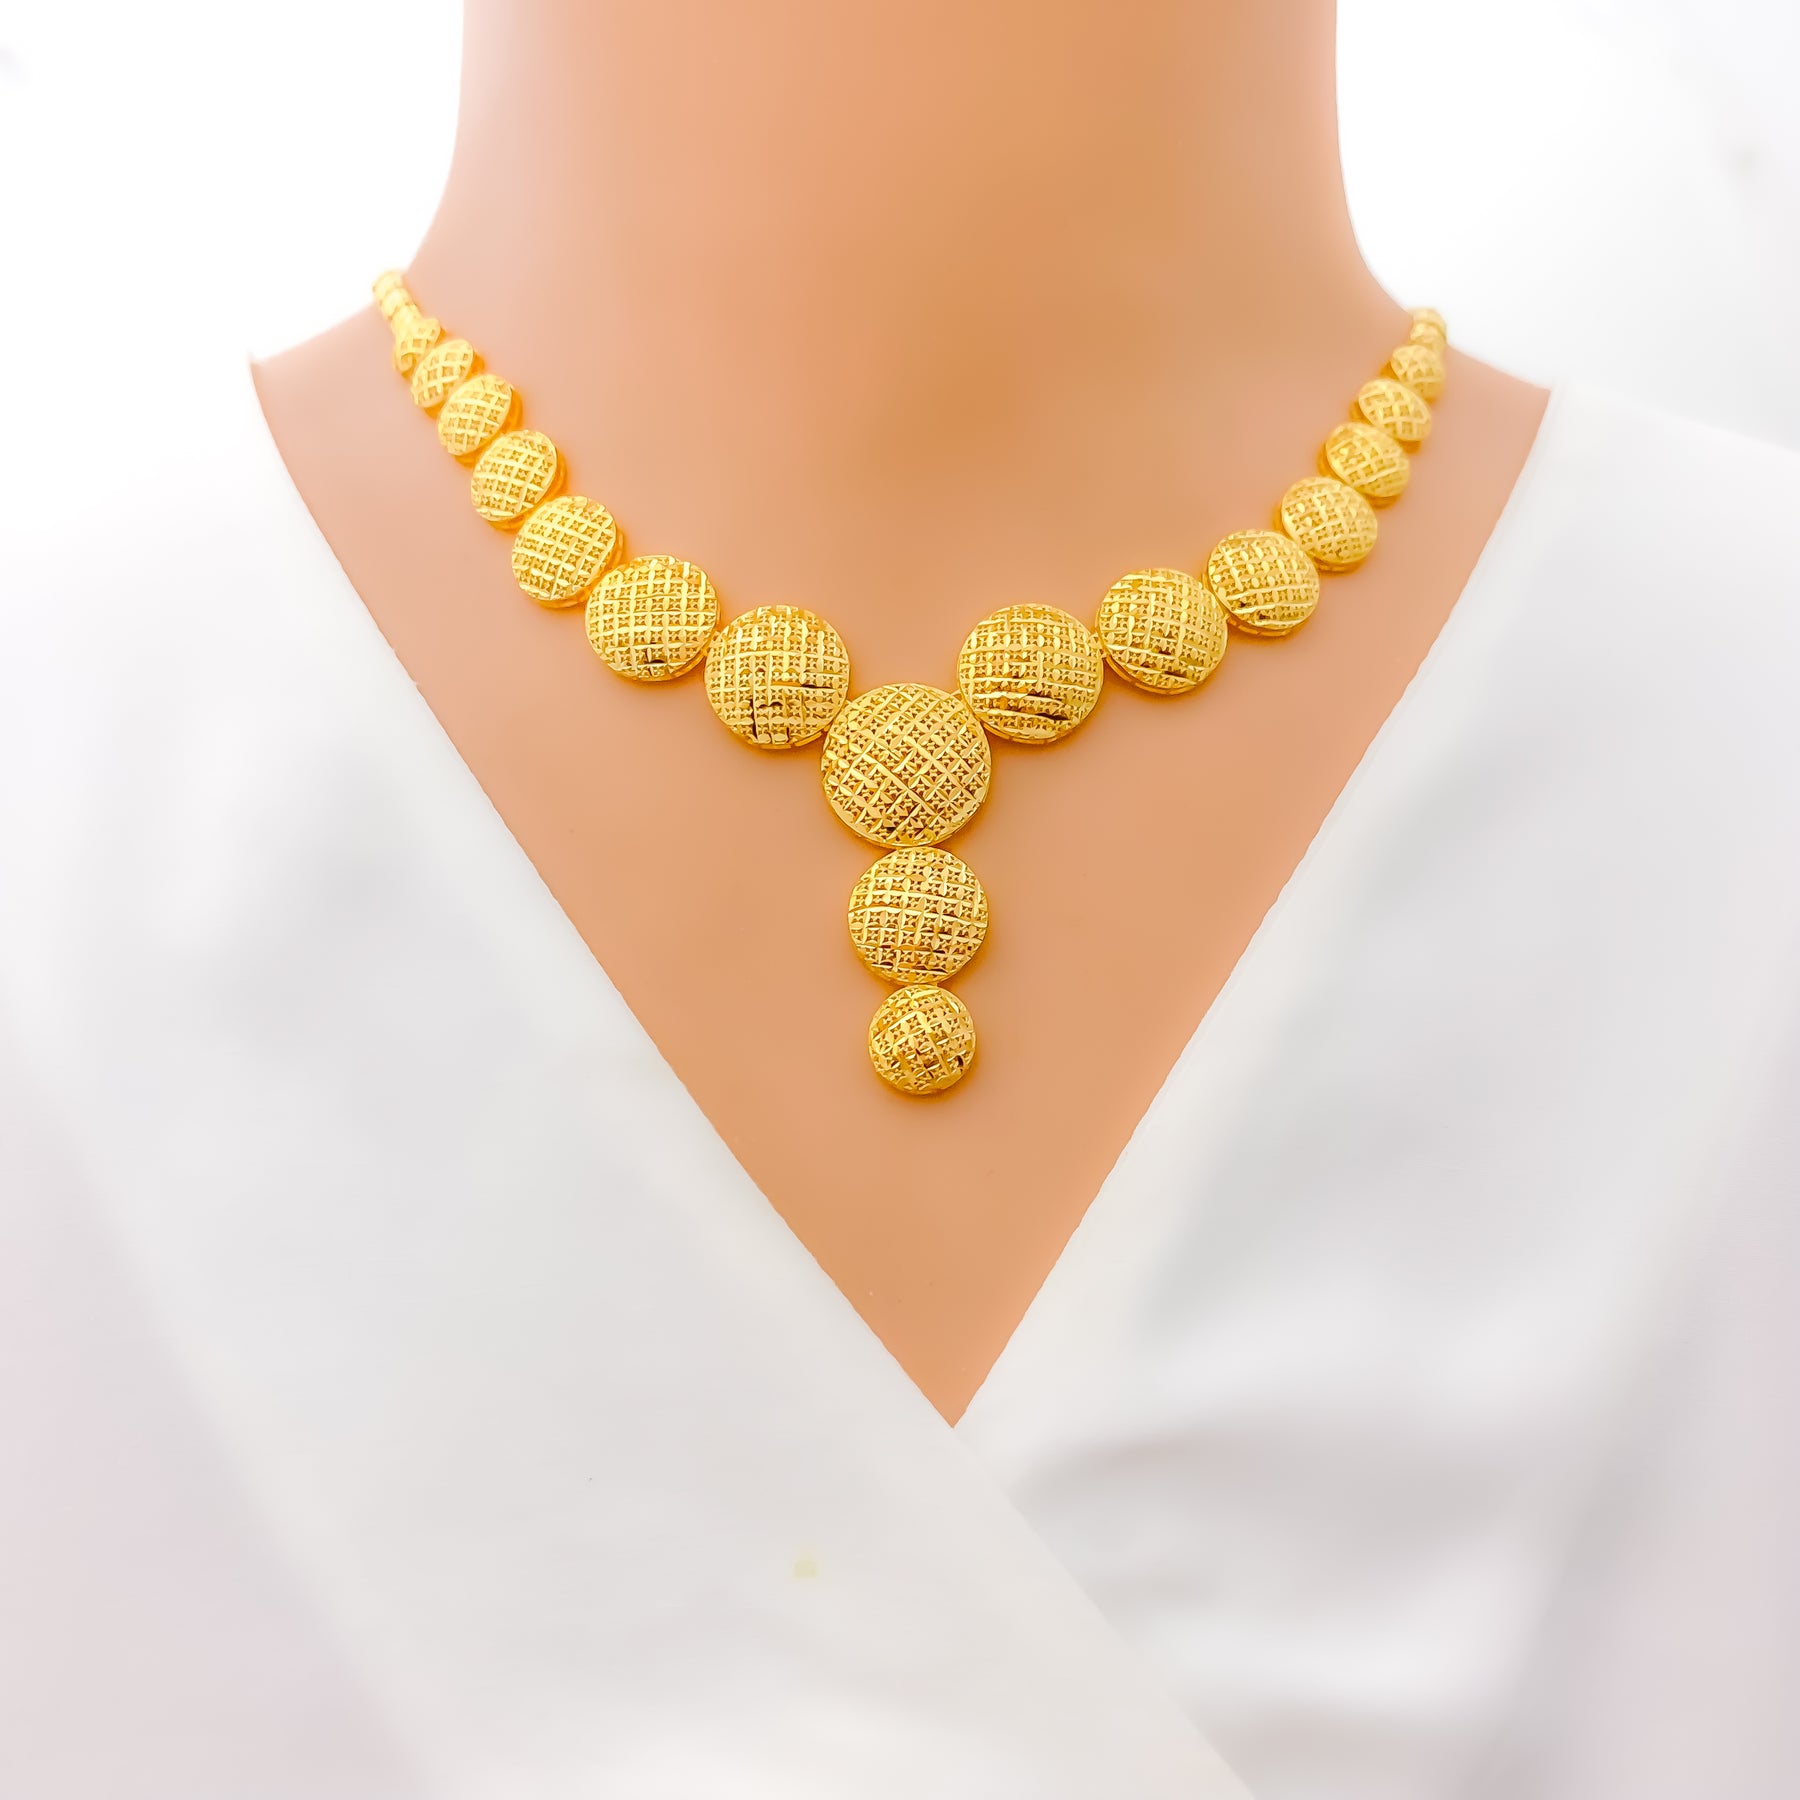 Buy 22K Gold Necklace Set | Latest Designs | Indian Jewelry For Women